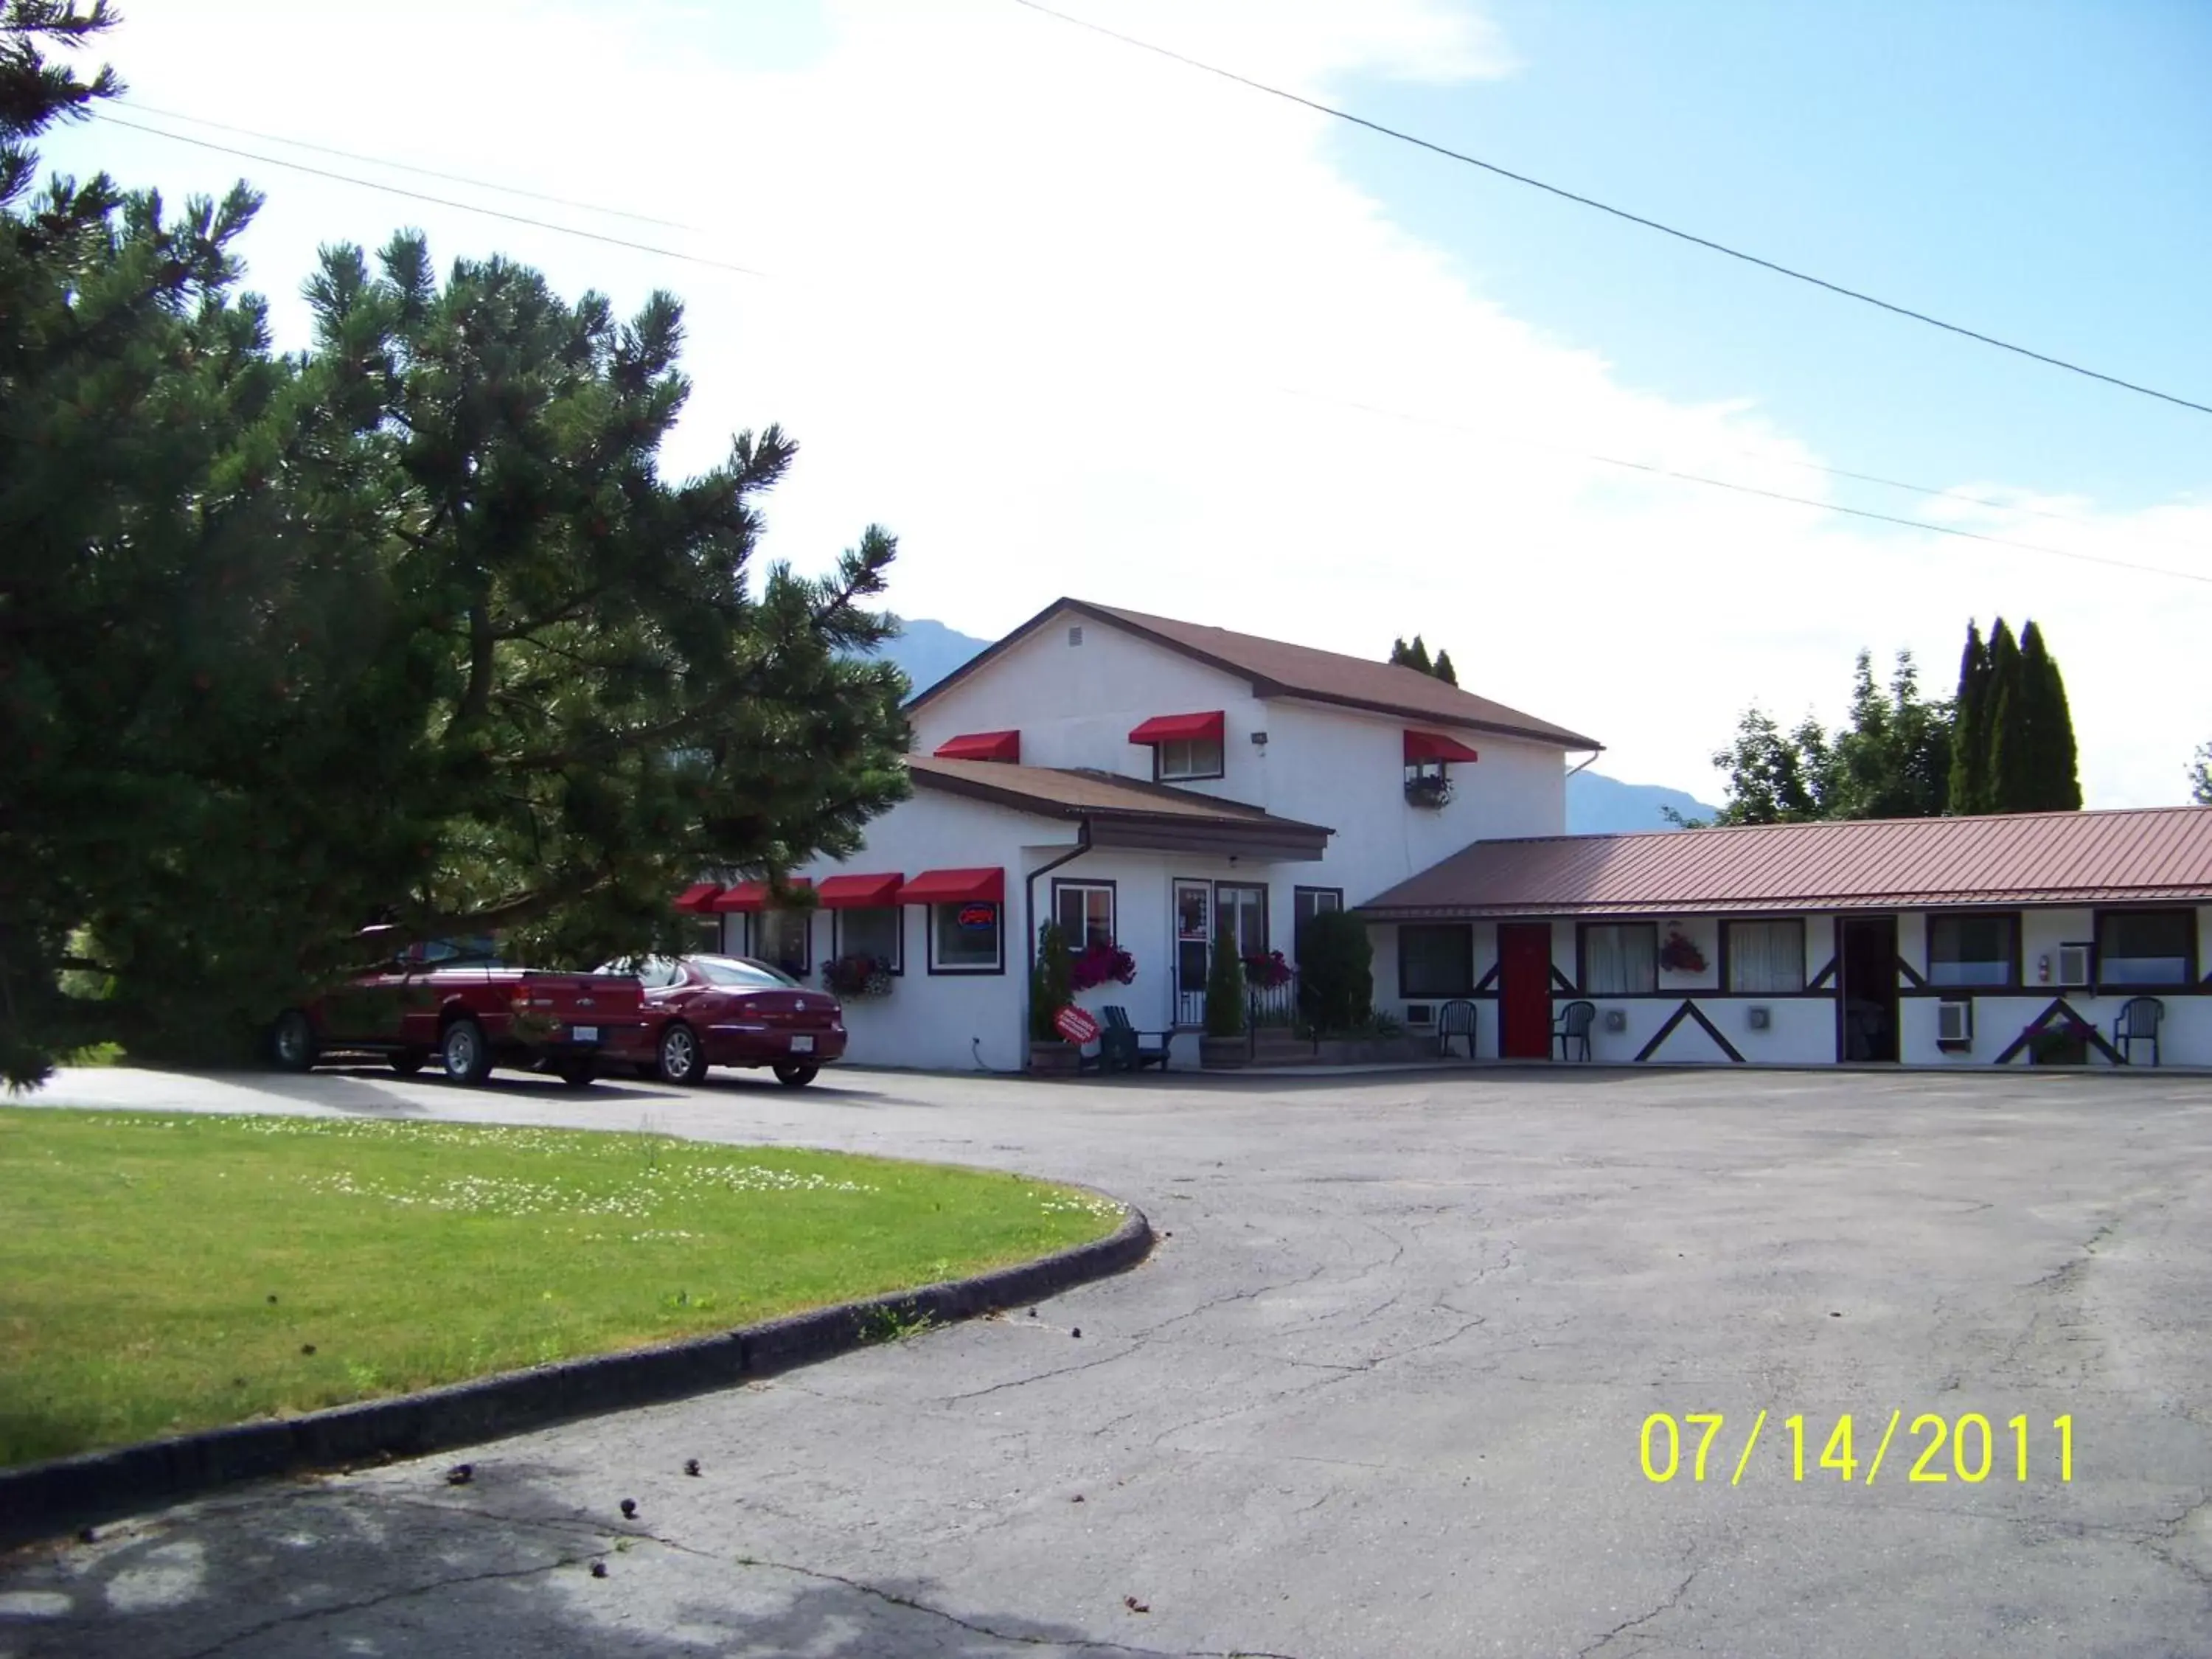 Property Building in Bavarian Orchard Motel